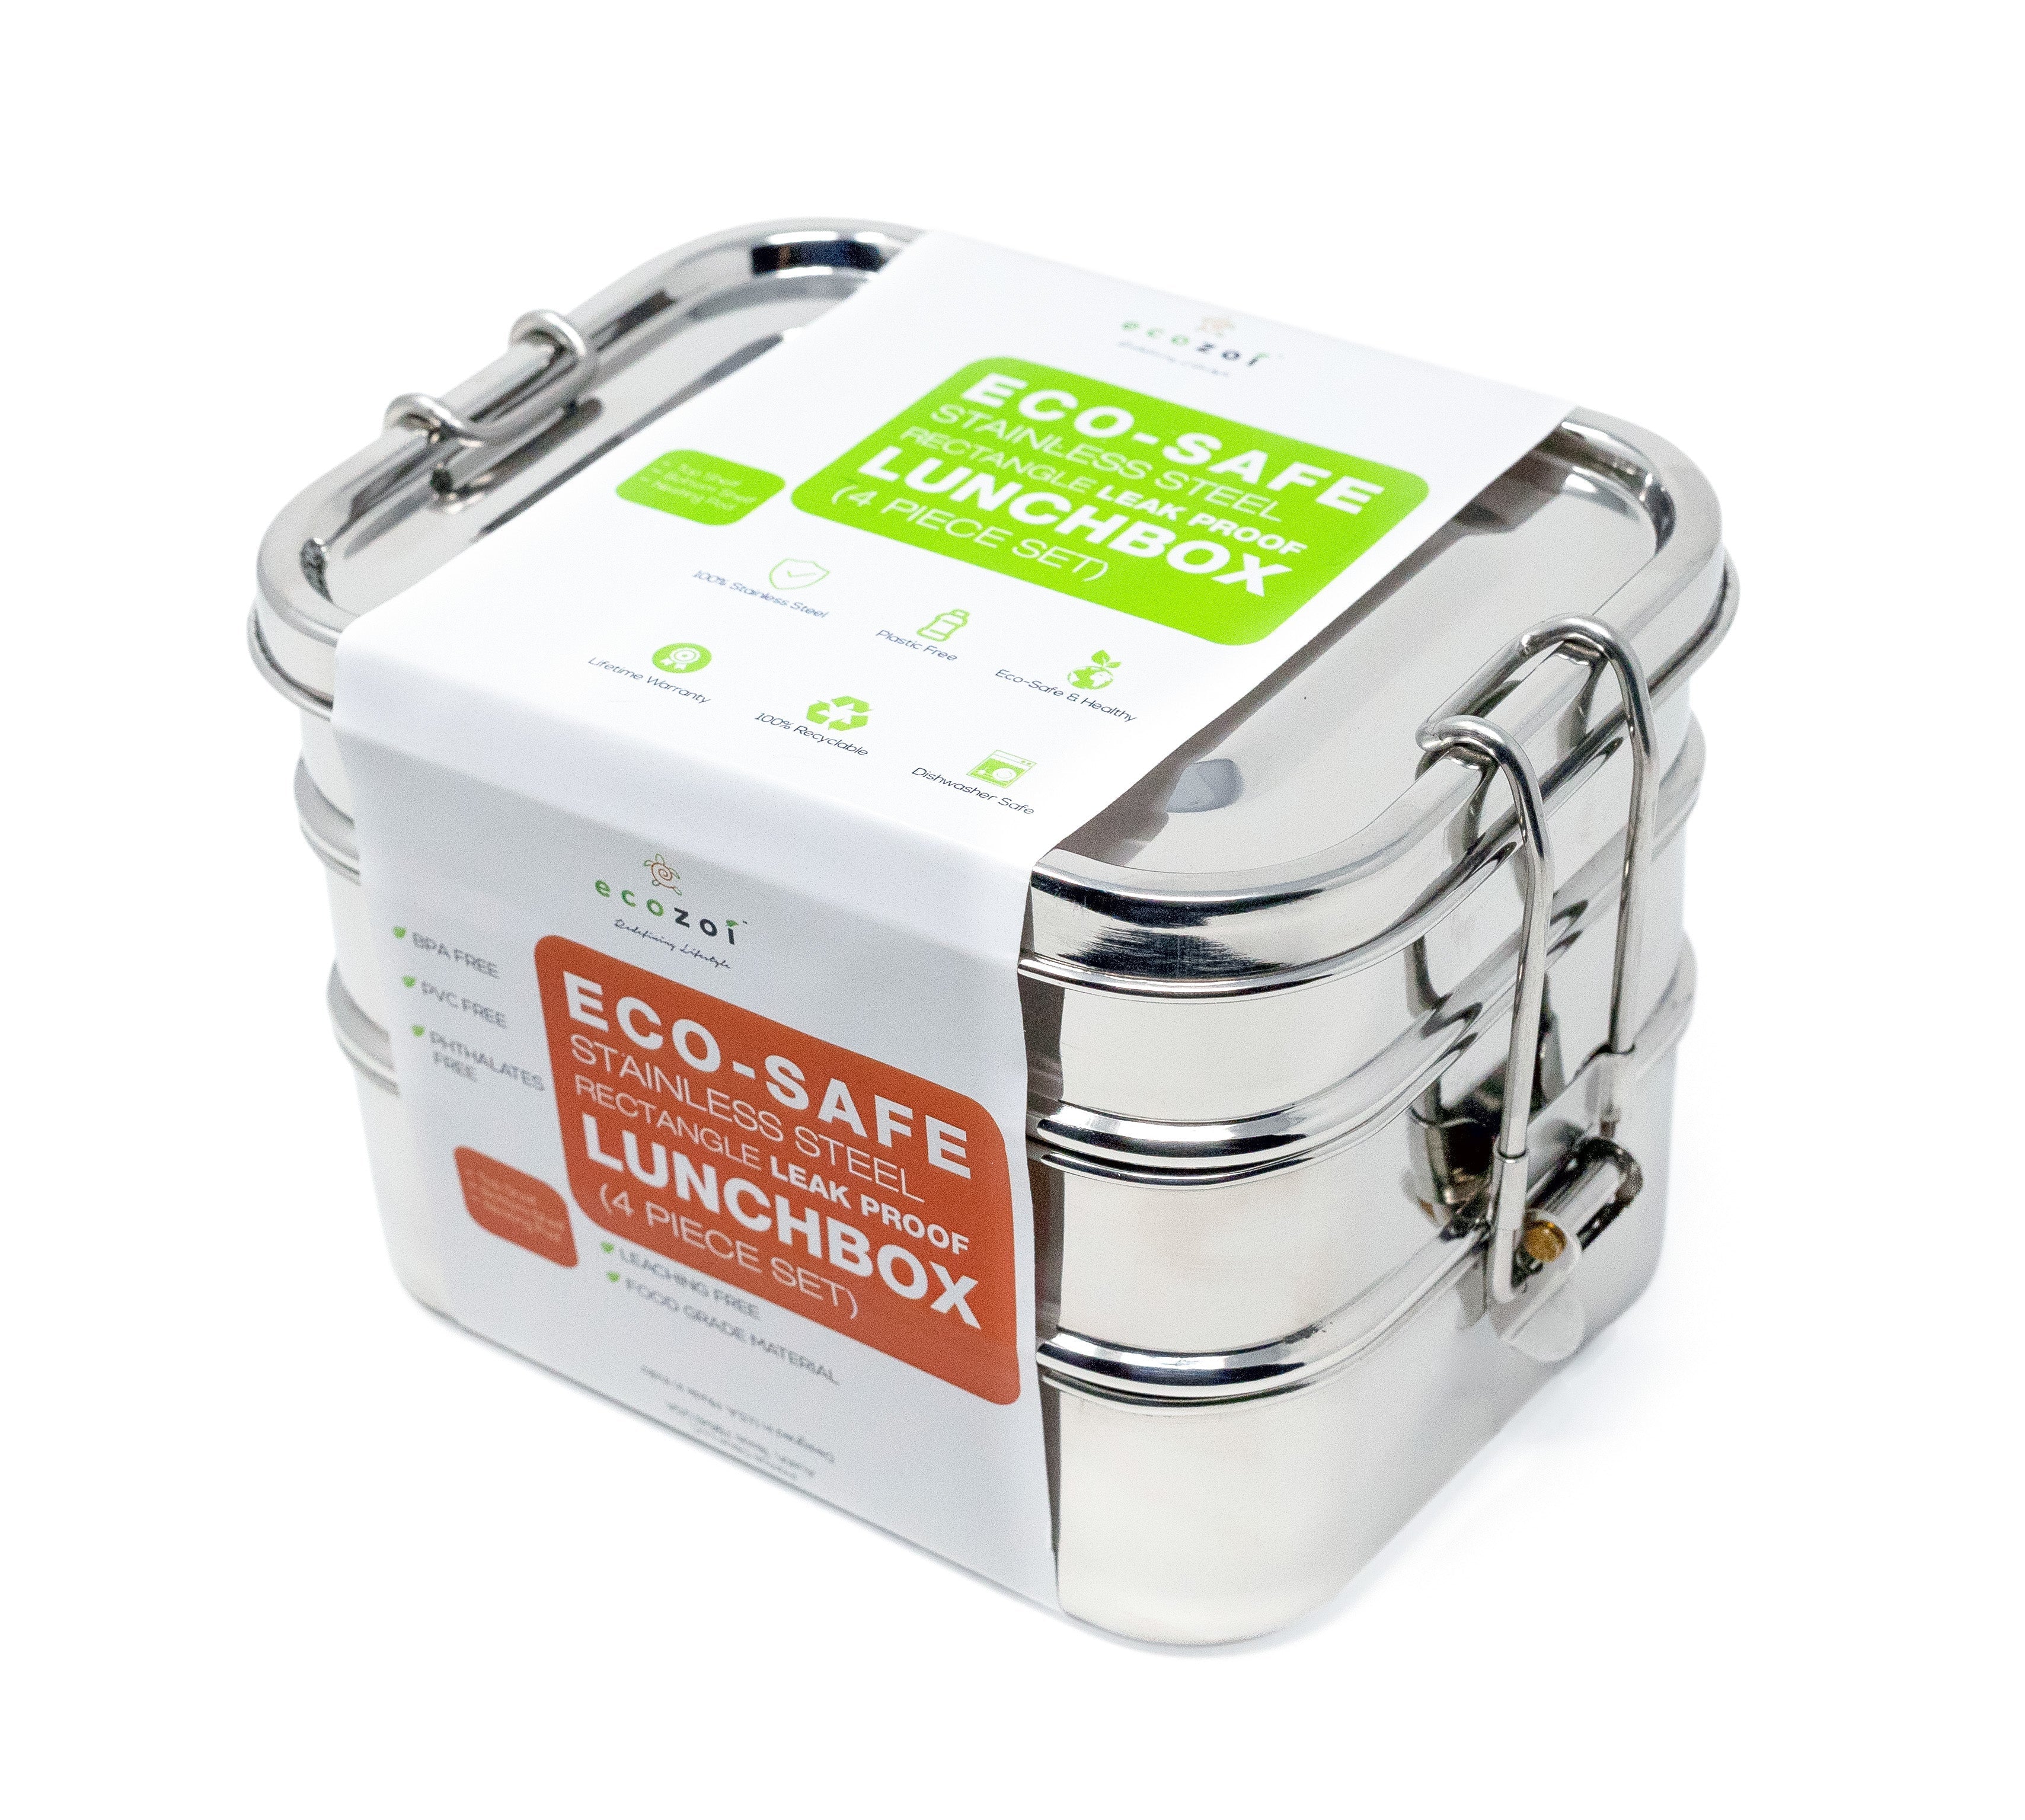 Stainless Steel Eco Lunch Box, Leak Proof, 3 Tier with 1 Mini Sauce Container, Convertible to 1 Tier, 70 Oz or 2100 ml Ecozoi 